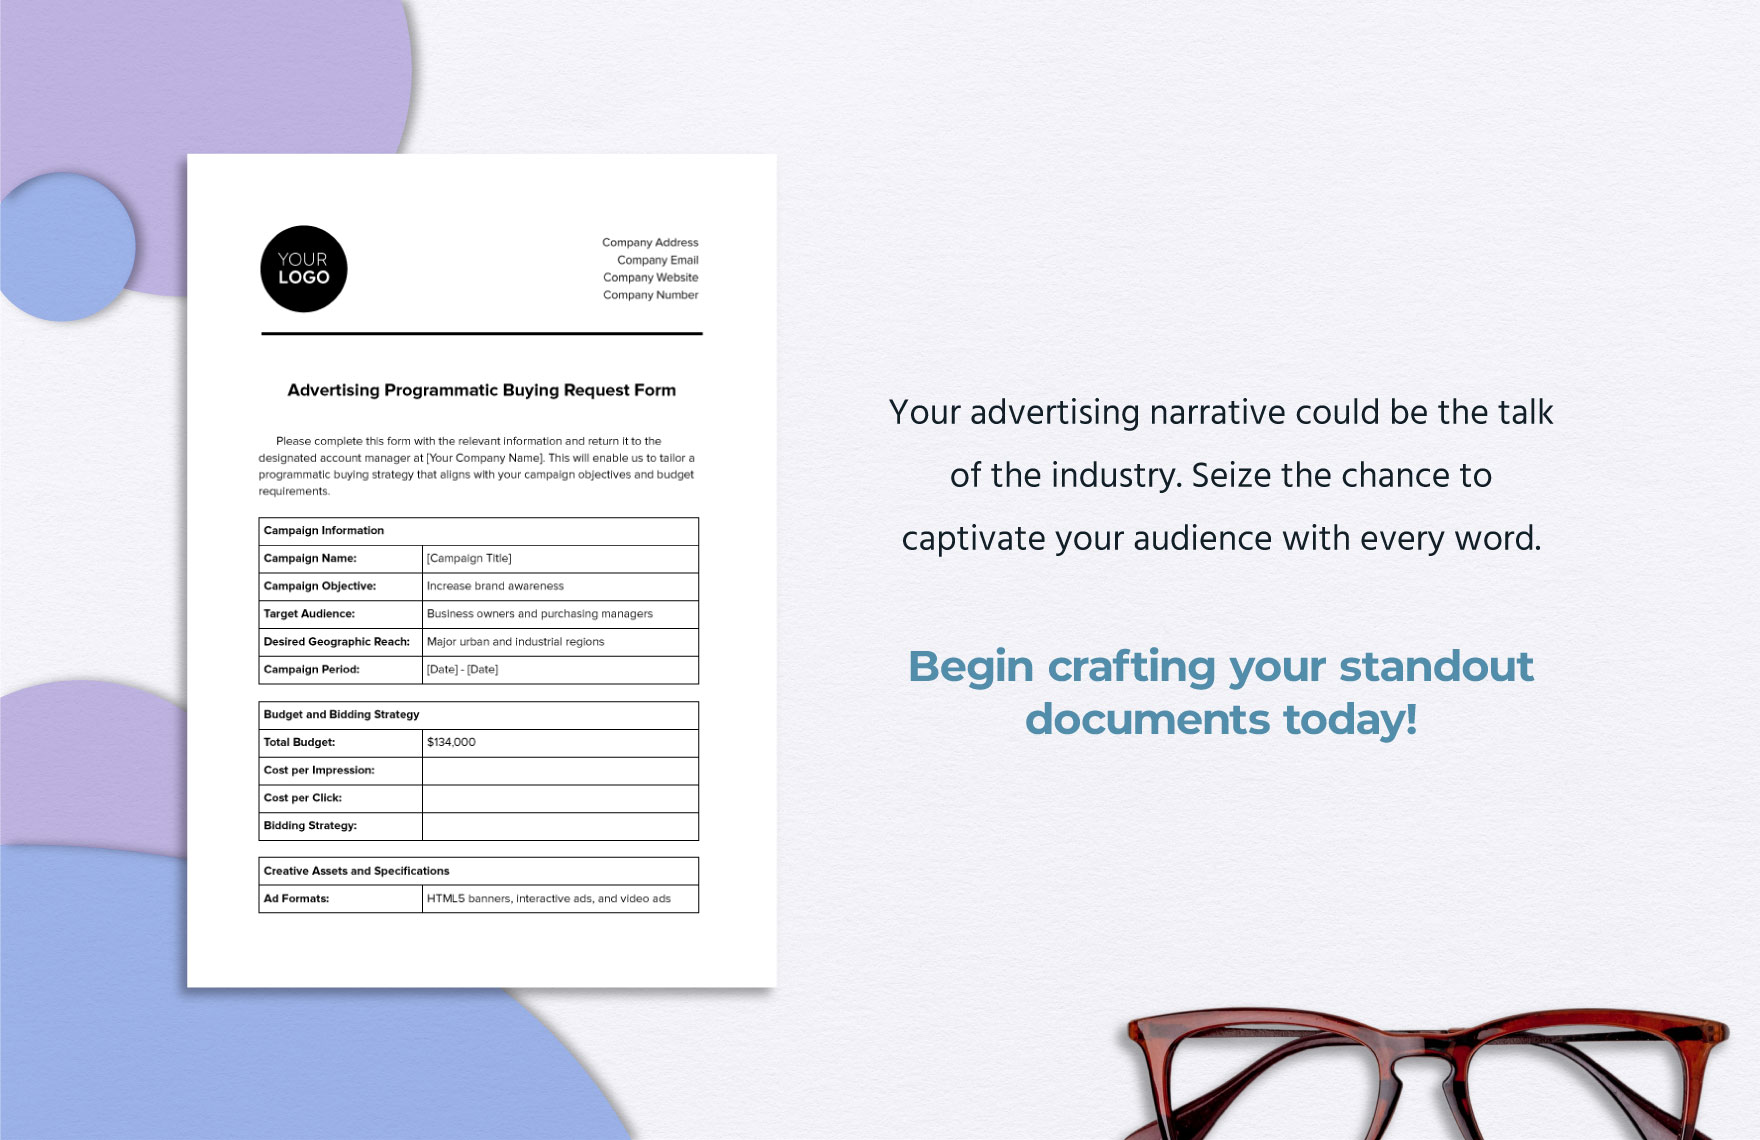 Advertising Programmatic Buying Request Form Template